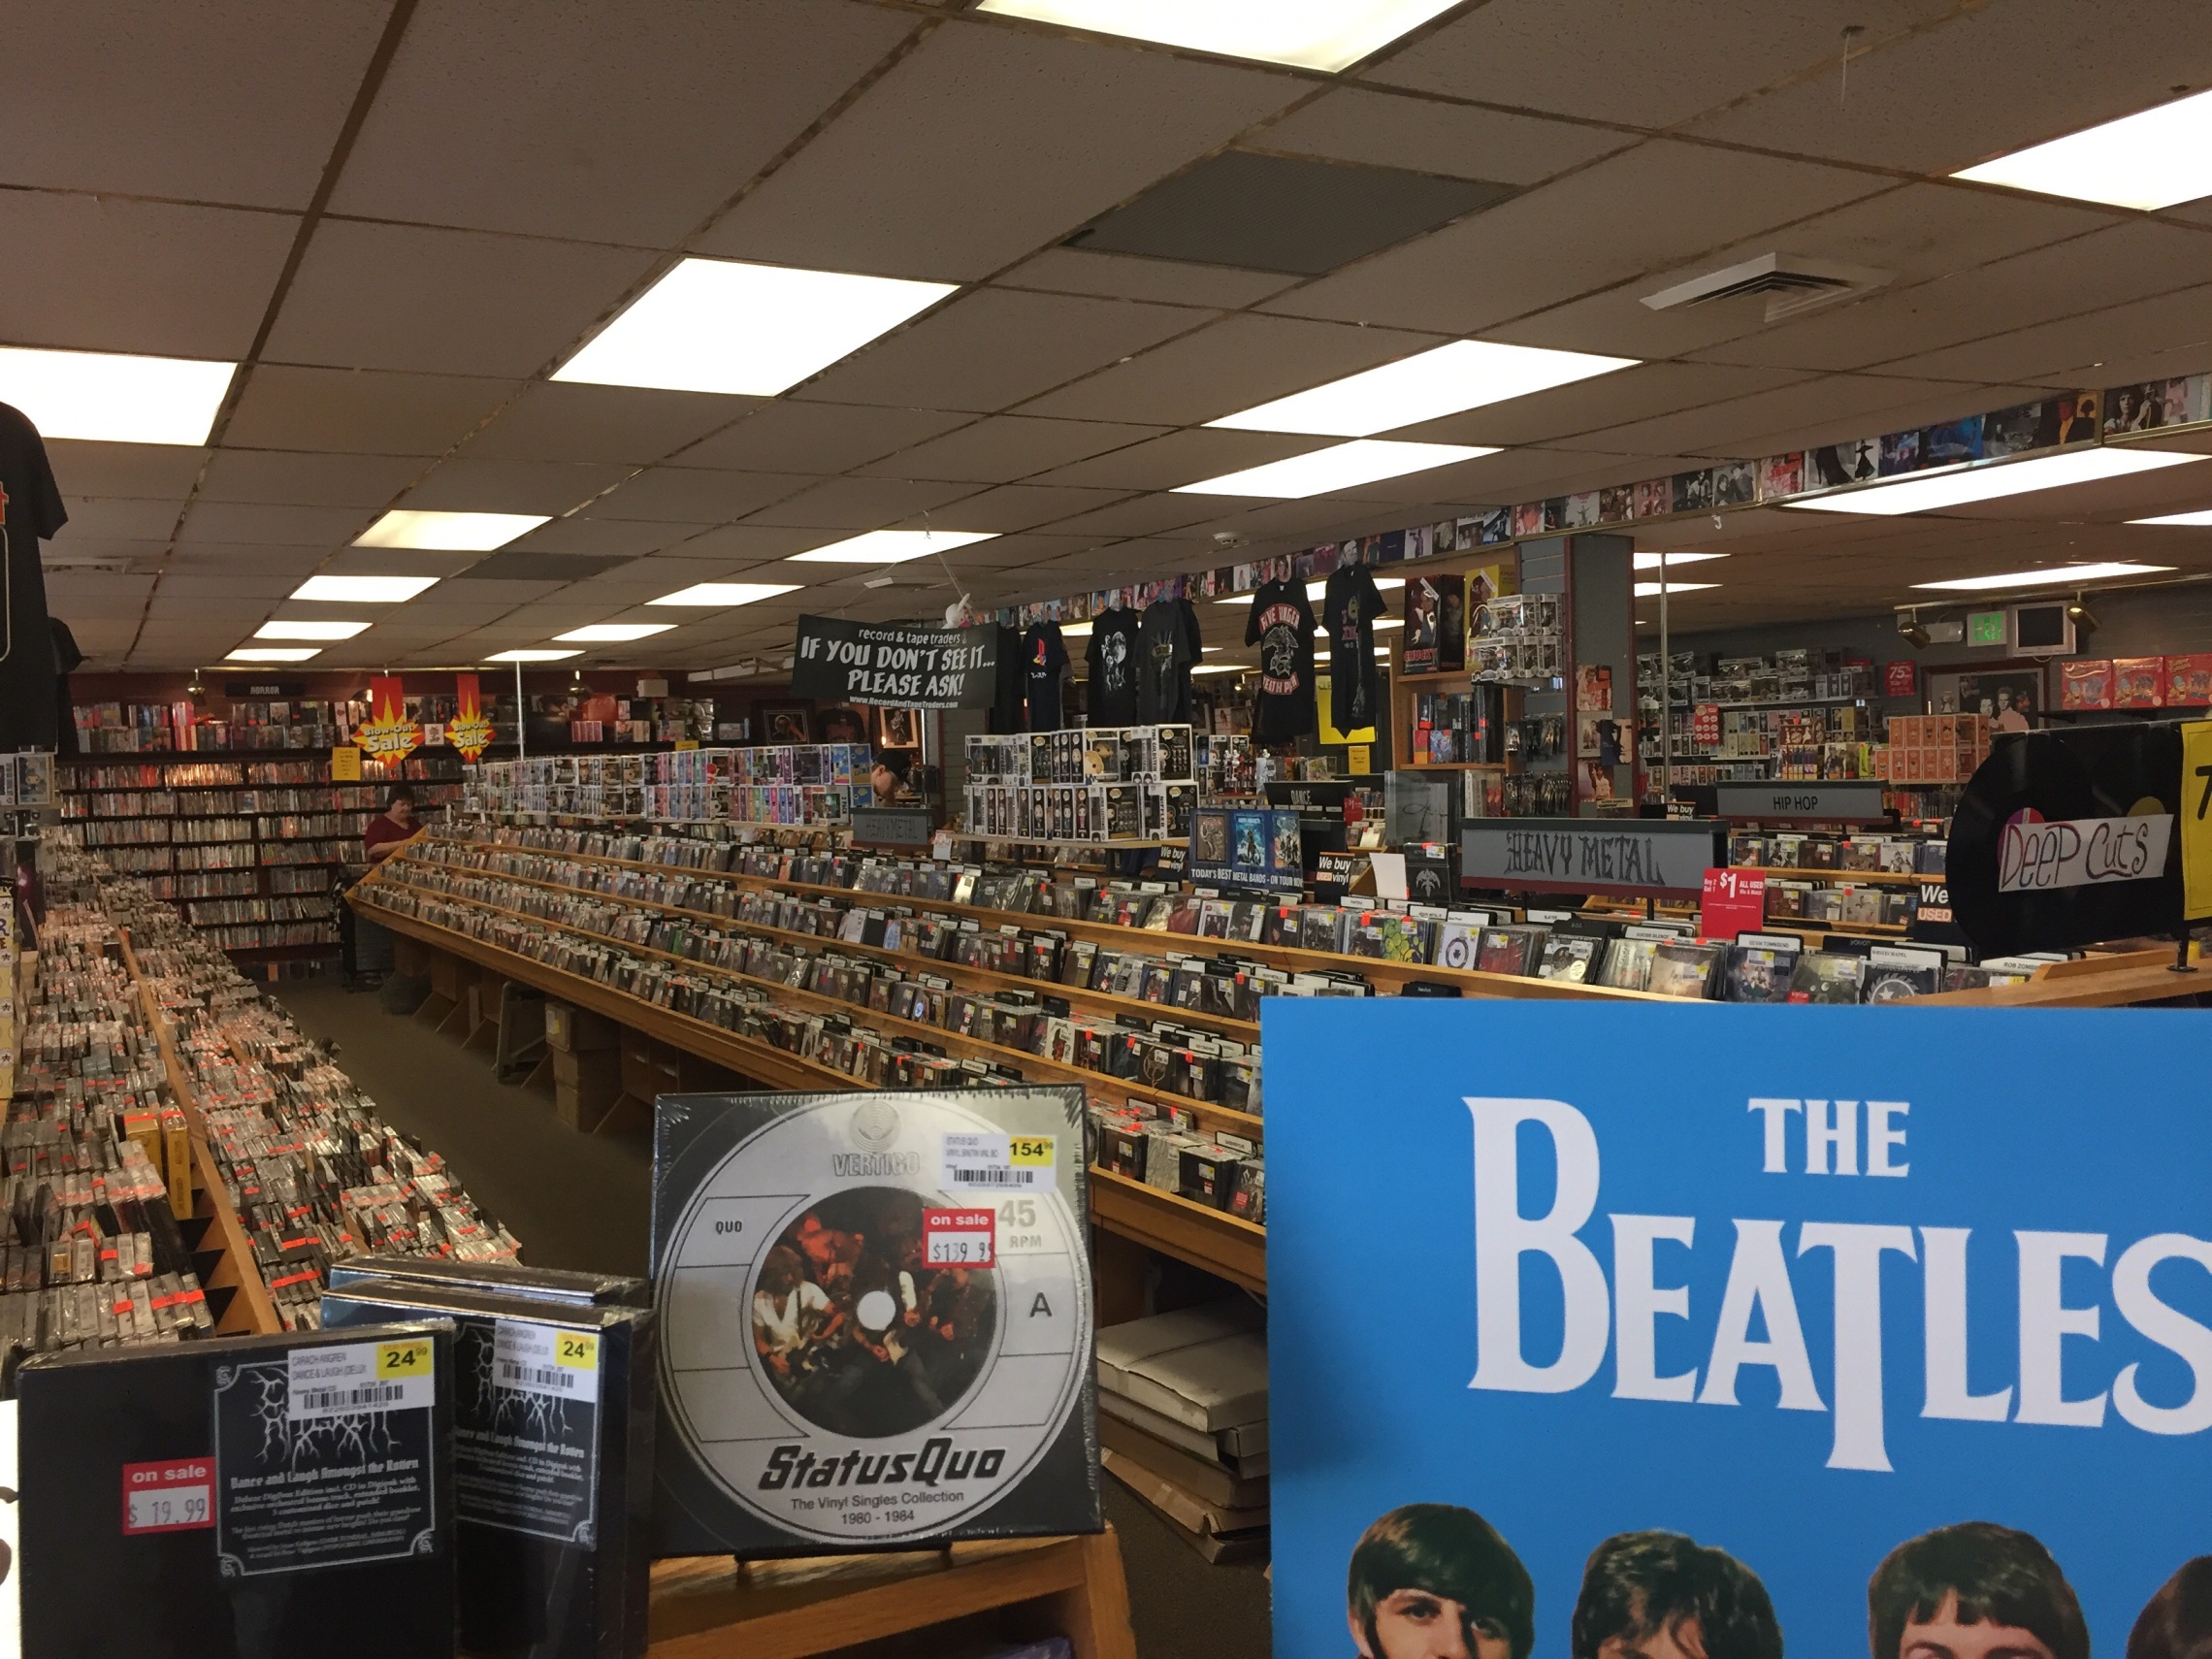 Two Record Stores in Baltimore - CirdecSongs